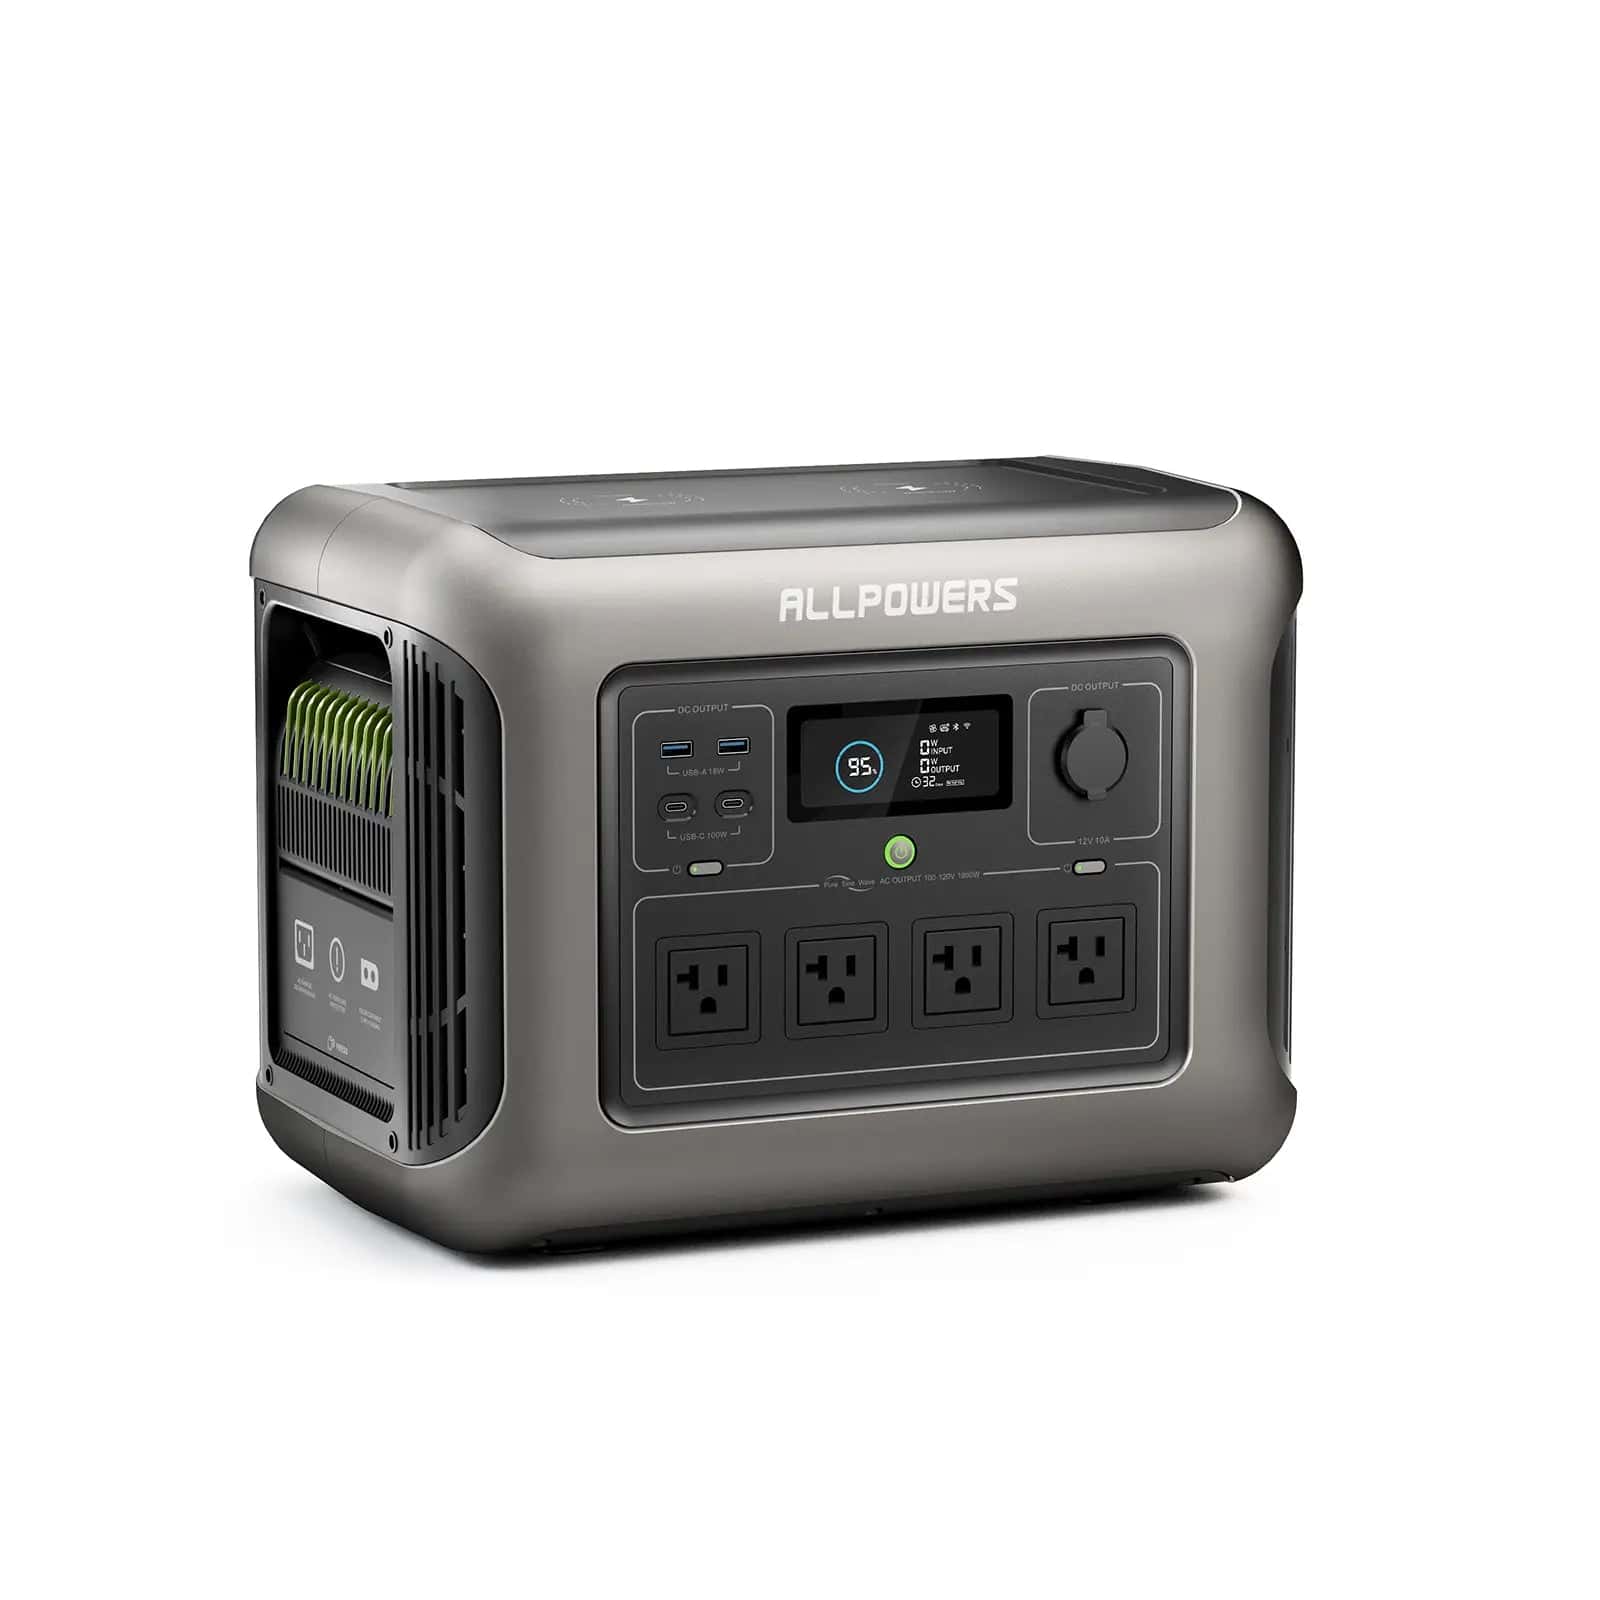 ALLPOWERS R1500 Portable Home Backup Power Station 1800W 1152Wh LiFeP04 Battery Review